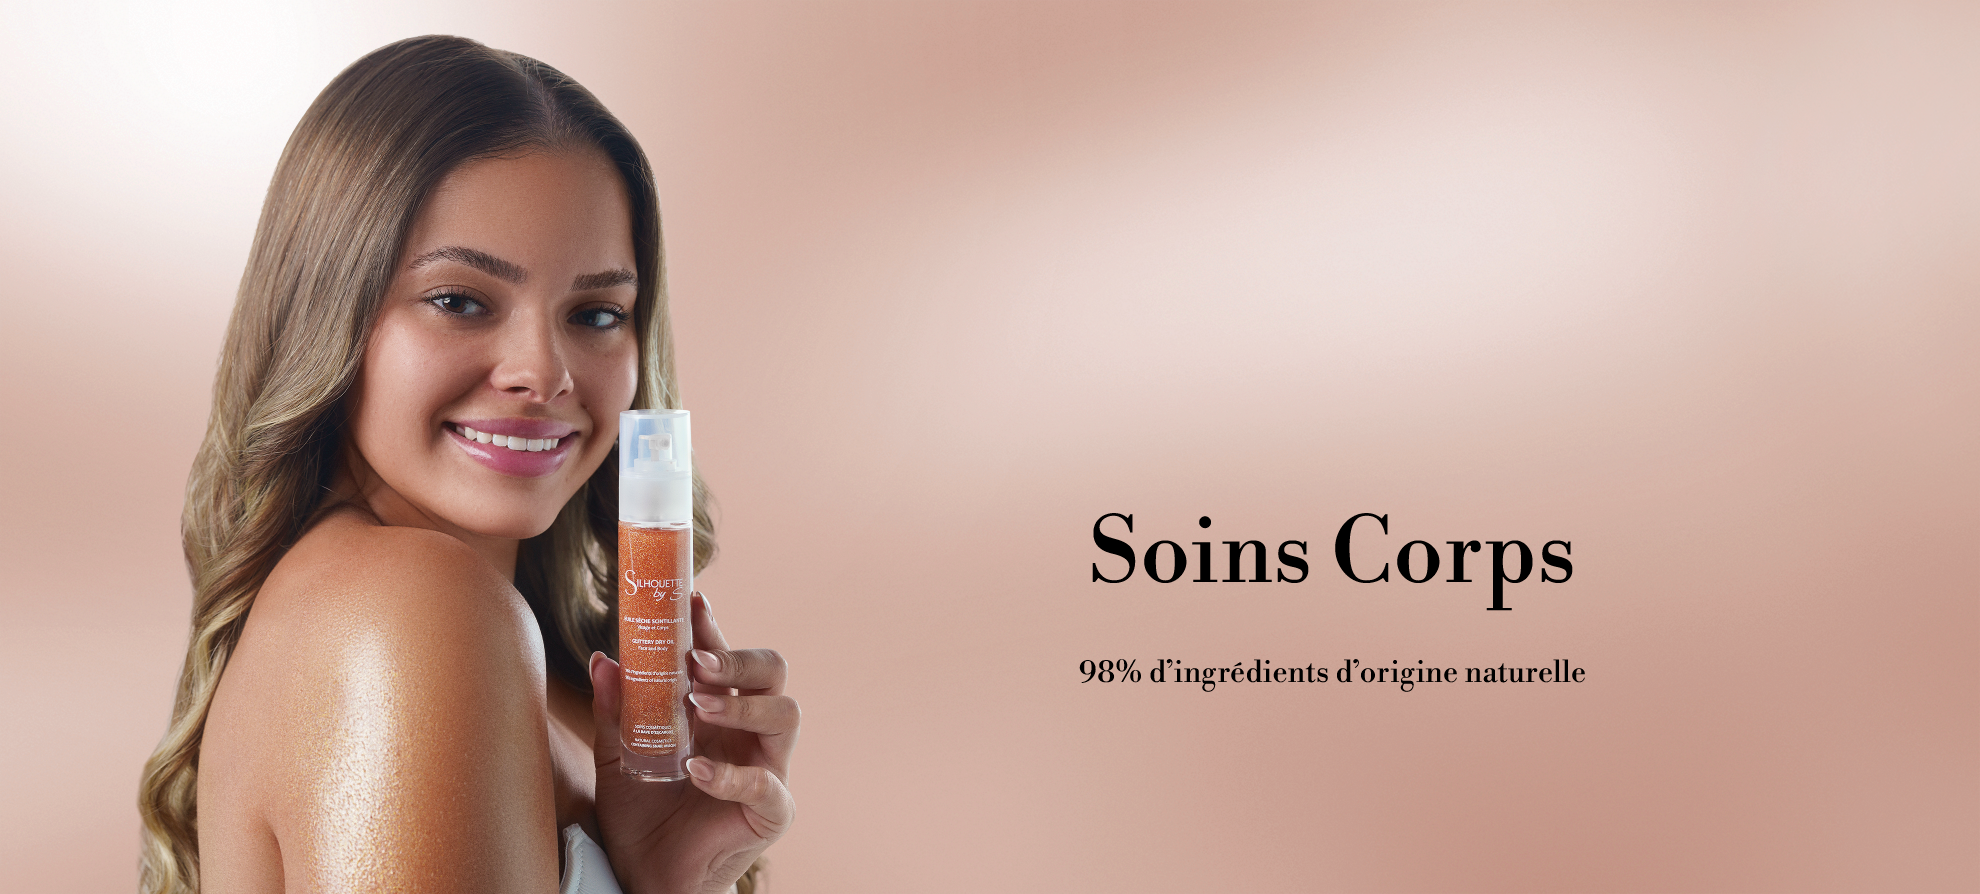 Soins Corps